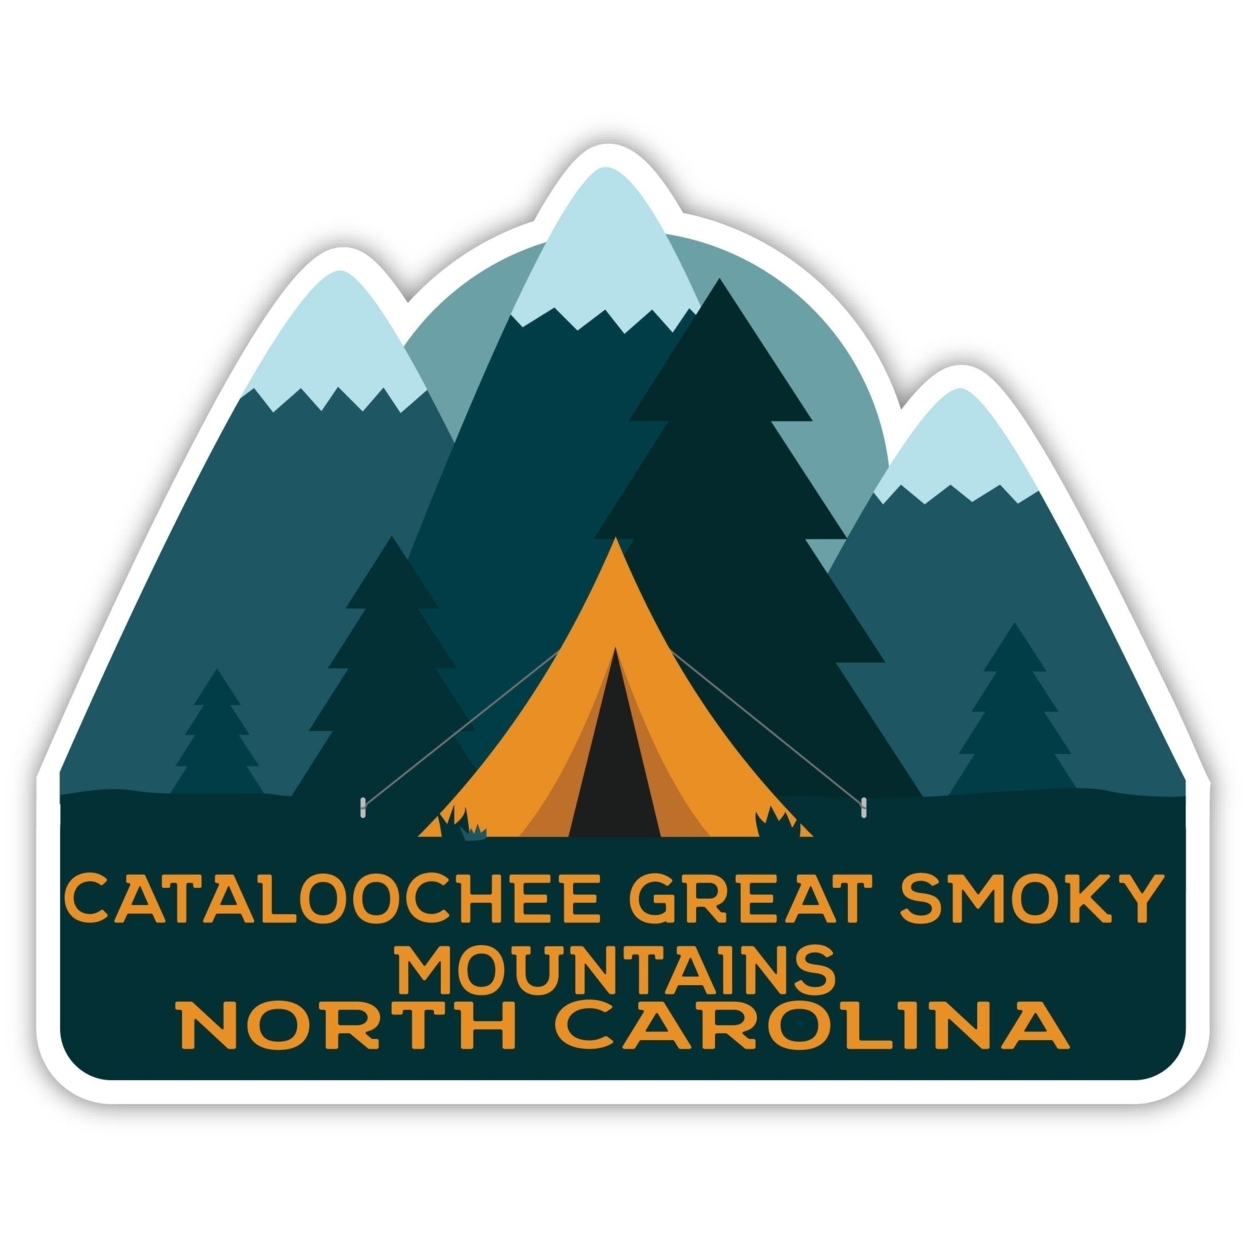 Cataloochee Great Smoky Mountains North Carolina Souvenir Decorative Stickers (Choose Theme And Size) - 4-Pack, 12-Inch, Tent